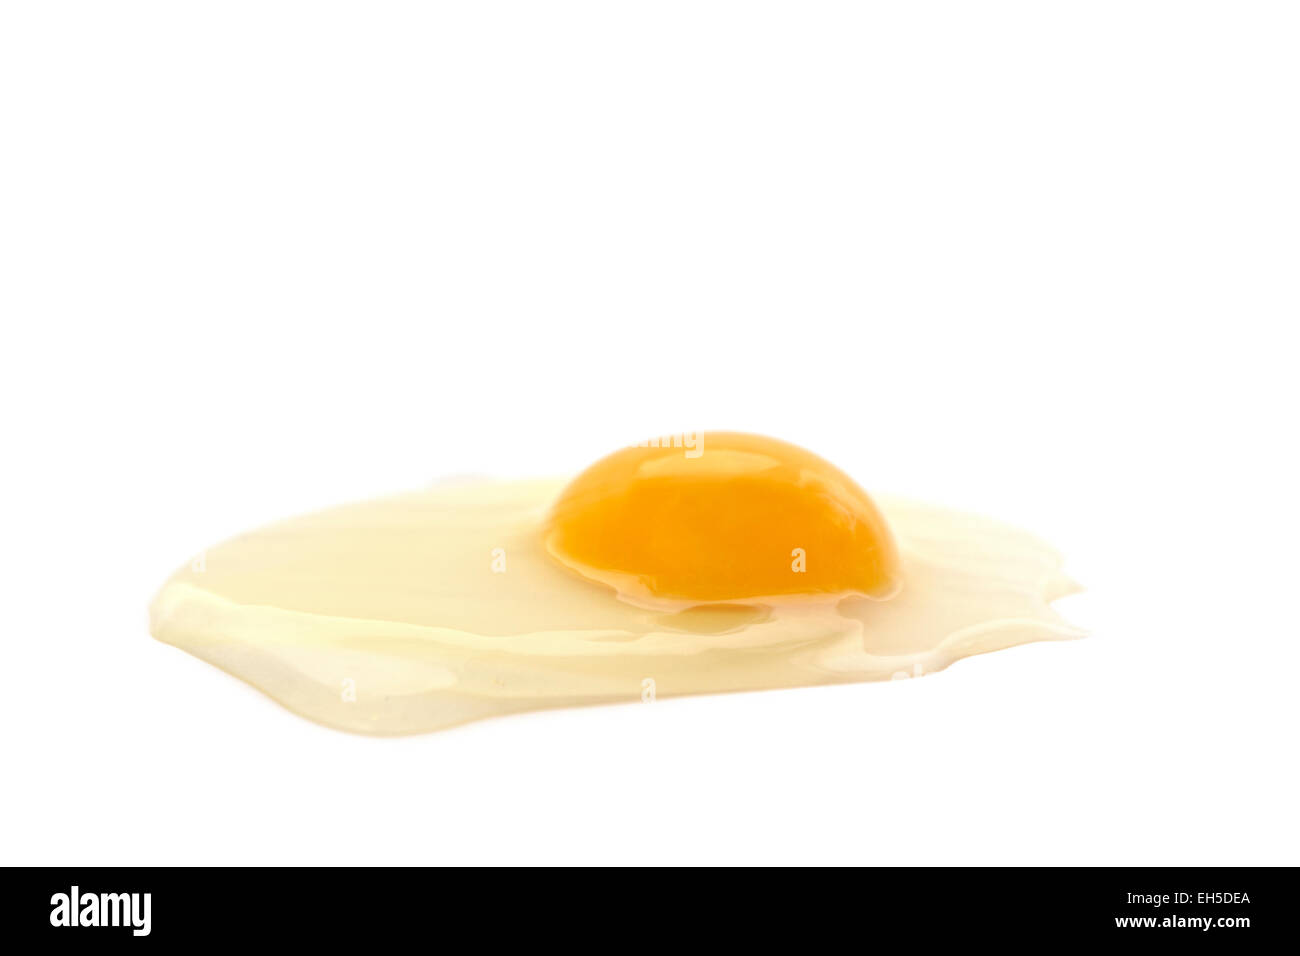 Side view of a organic cracked egg with egg white and yolk on white background. Stock Photo